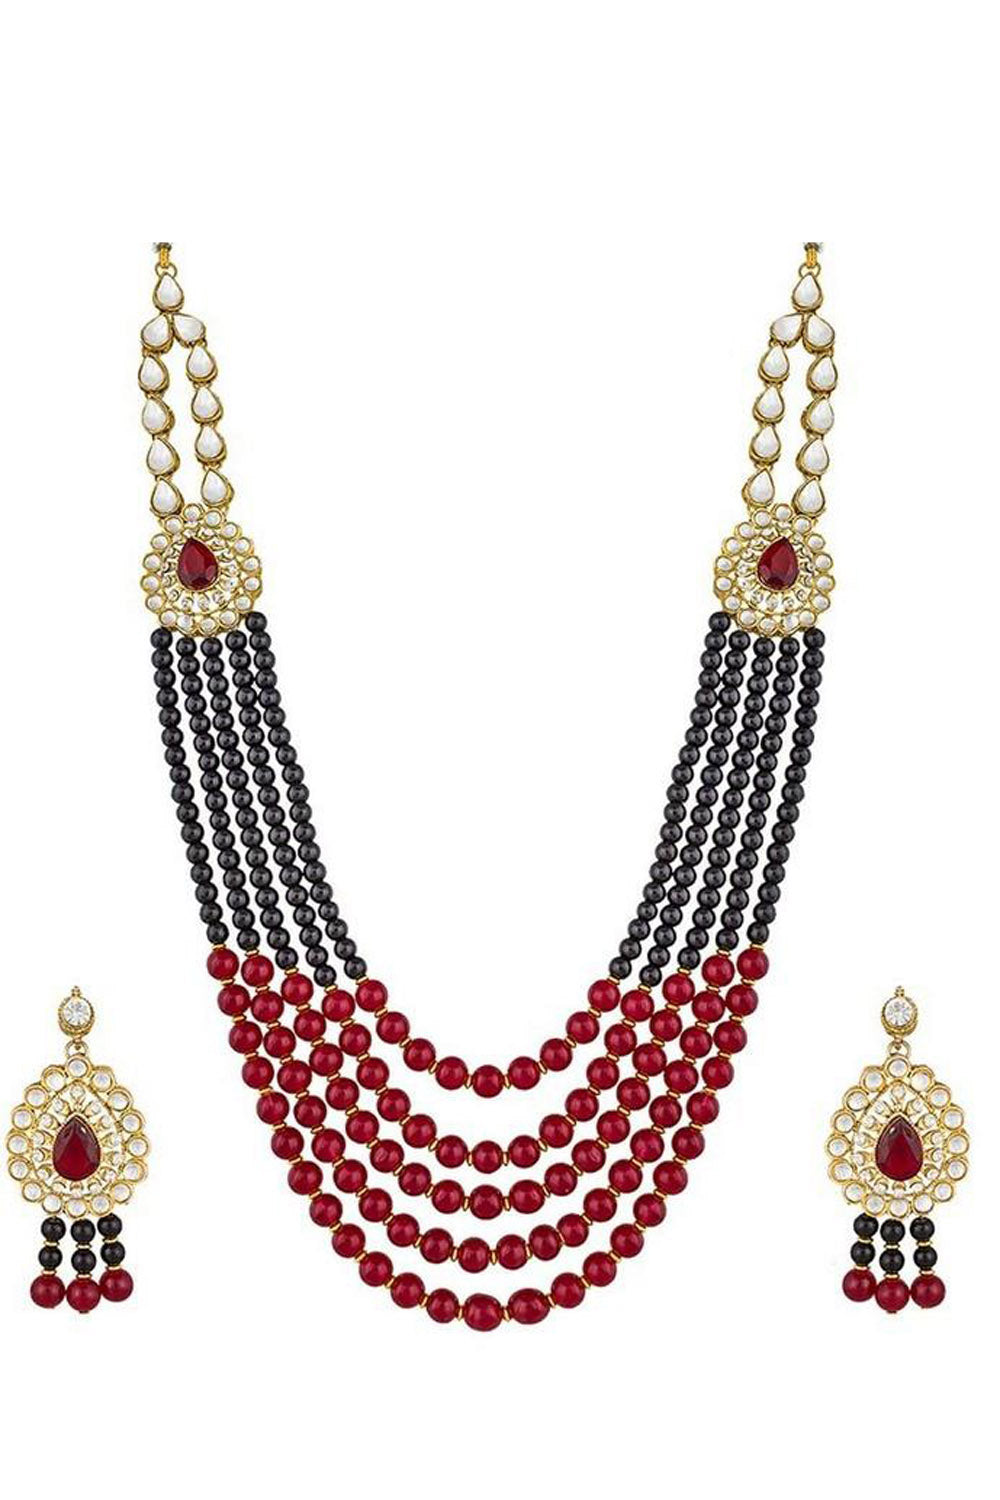 Women's Alloy Necklace in Red and Black